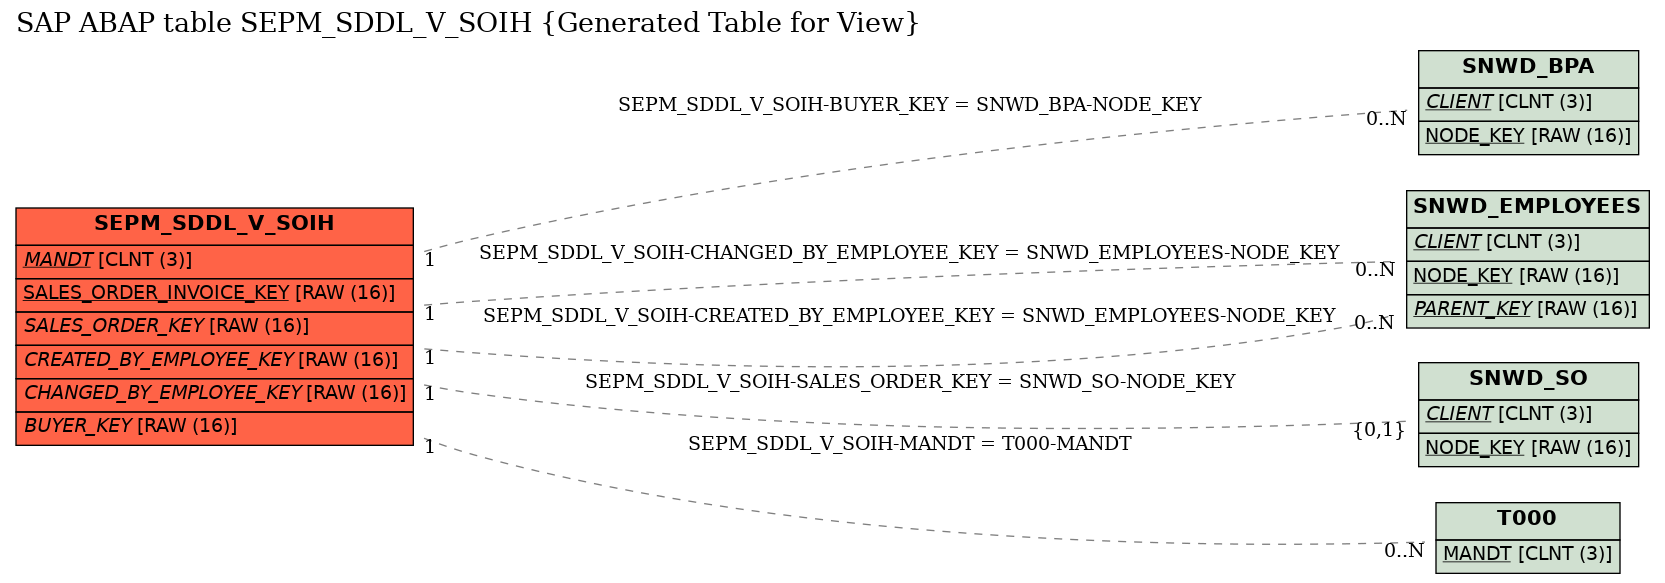 E-R Diagram for table SEPM_SDDL_V_SOIH (Generated Table for View)